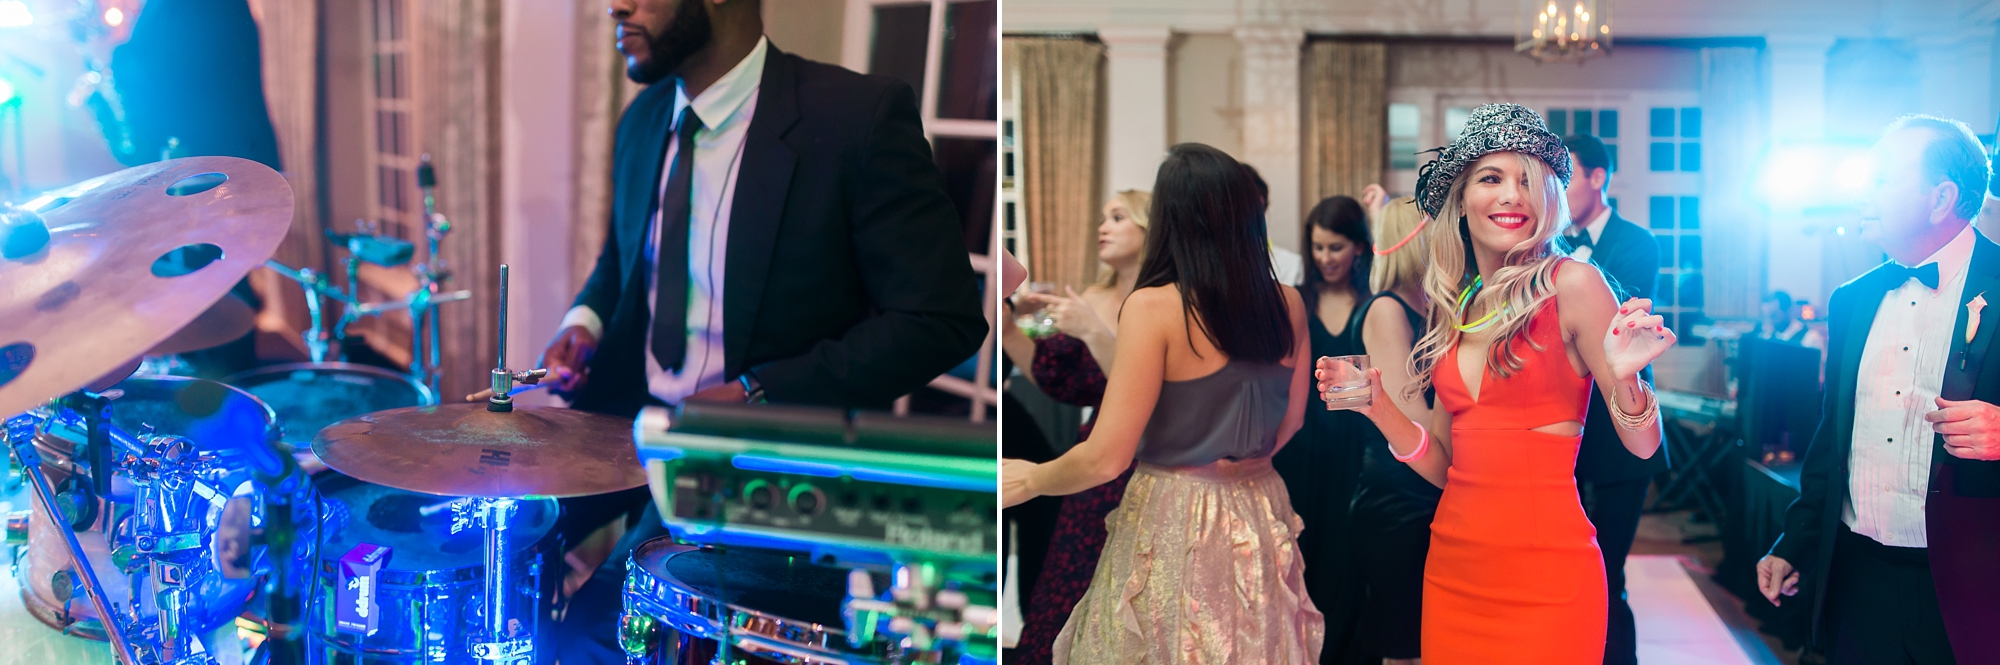 Black Tie Wedding Reception at East Lake Golf Club by Atlanta based wedding photographers Leigh and Becca